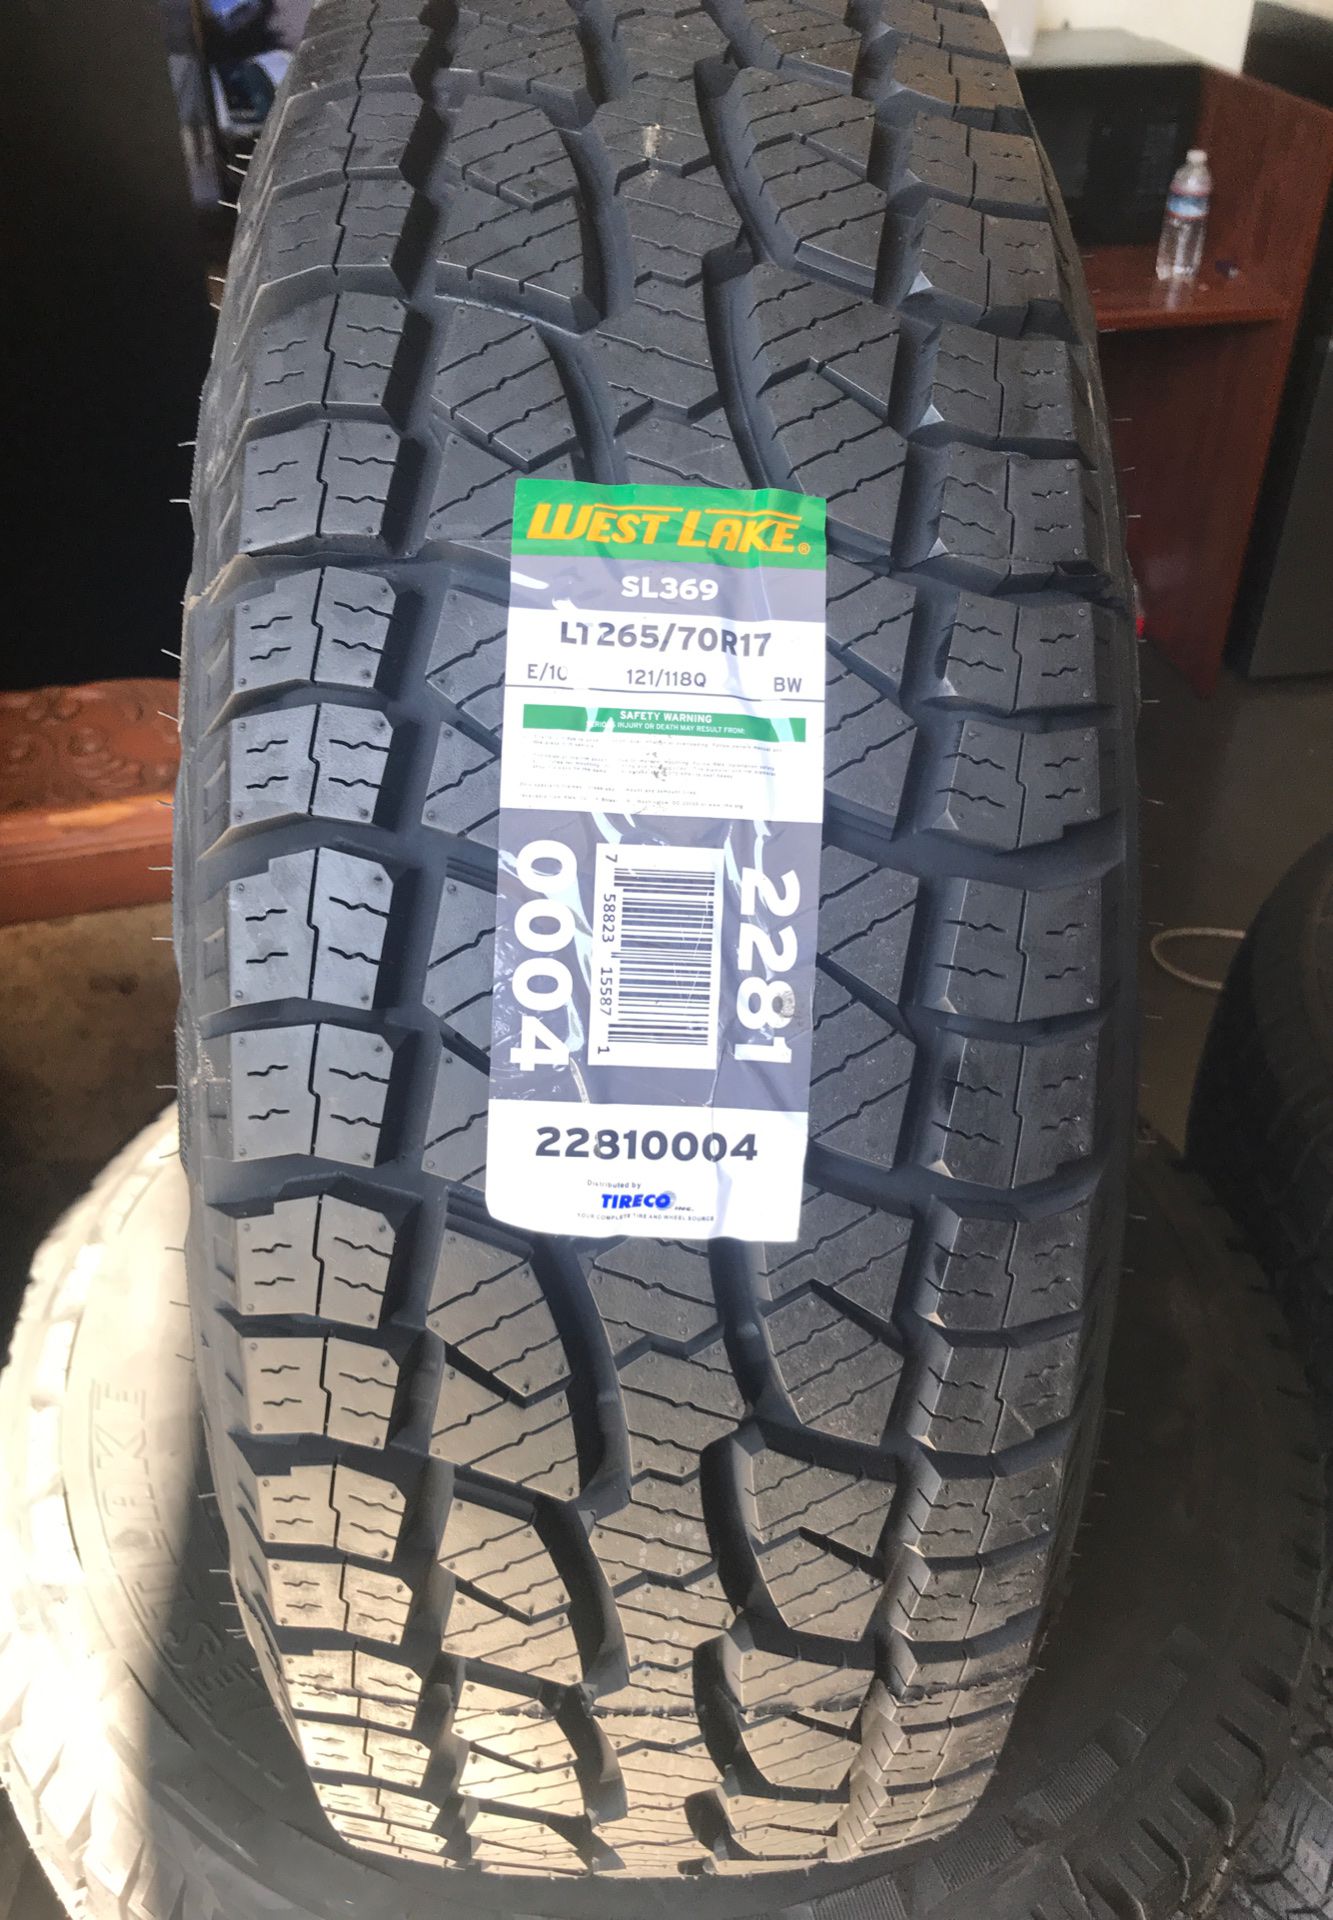 LT265/70R17. $450 Tax and labor not included